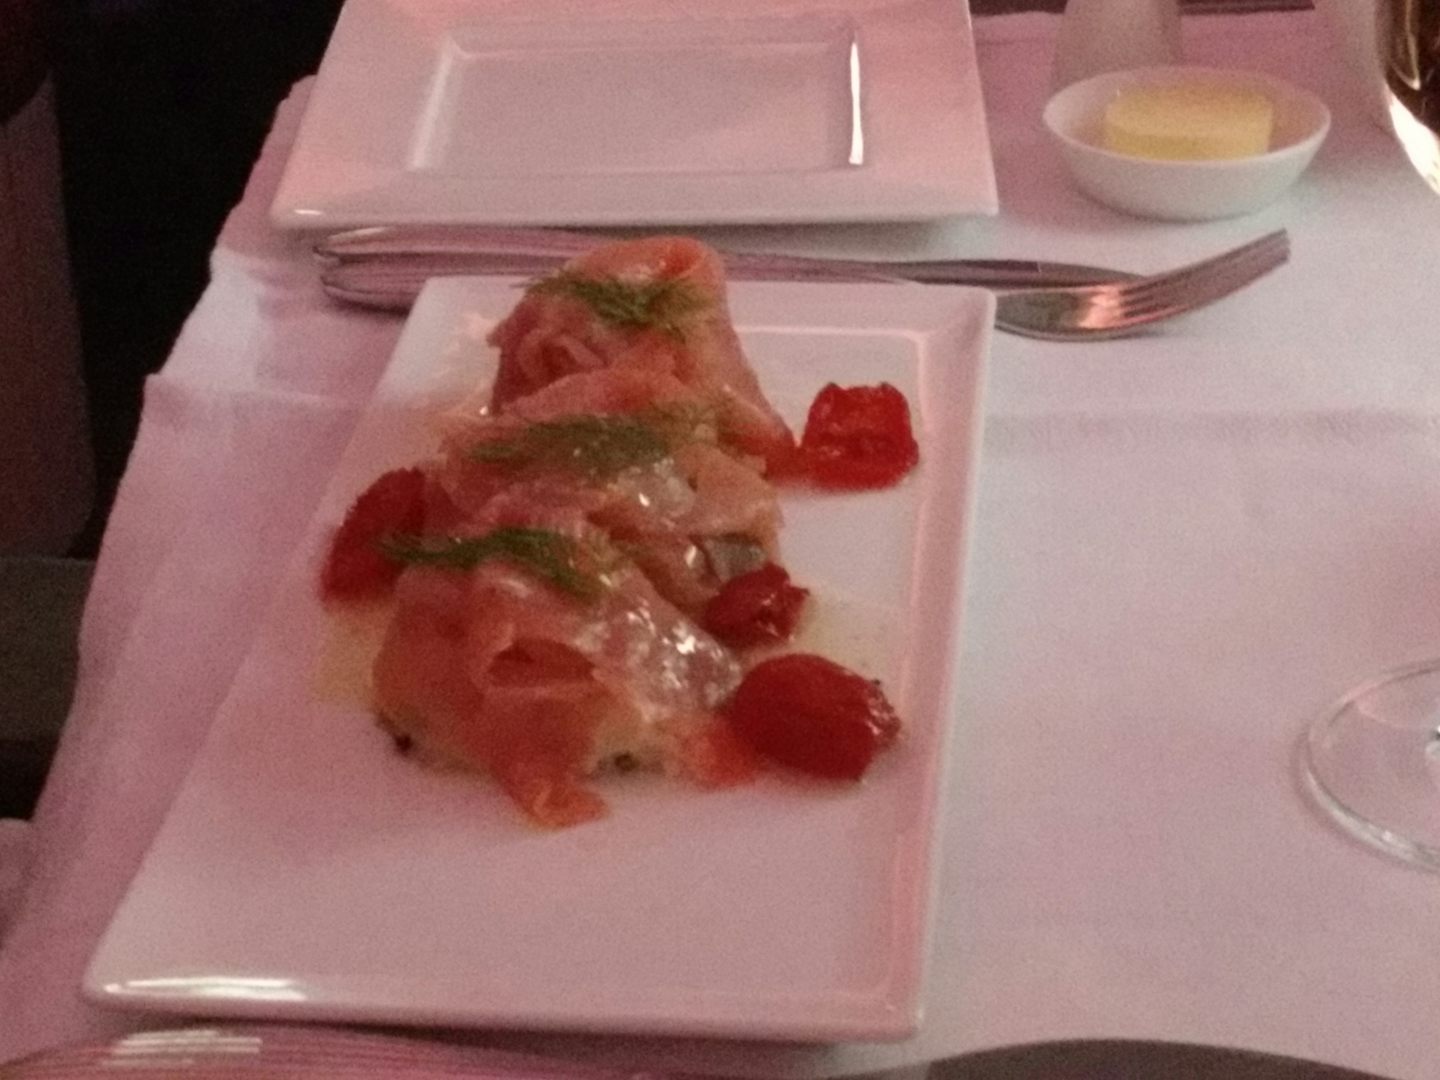 THIS Starter served on the AIRLINE was better than any served on this cruis